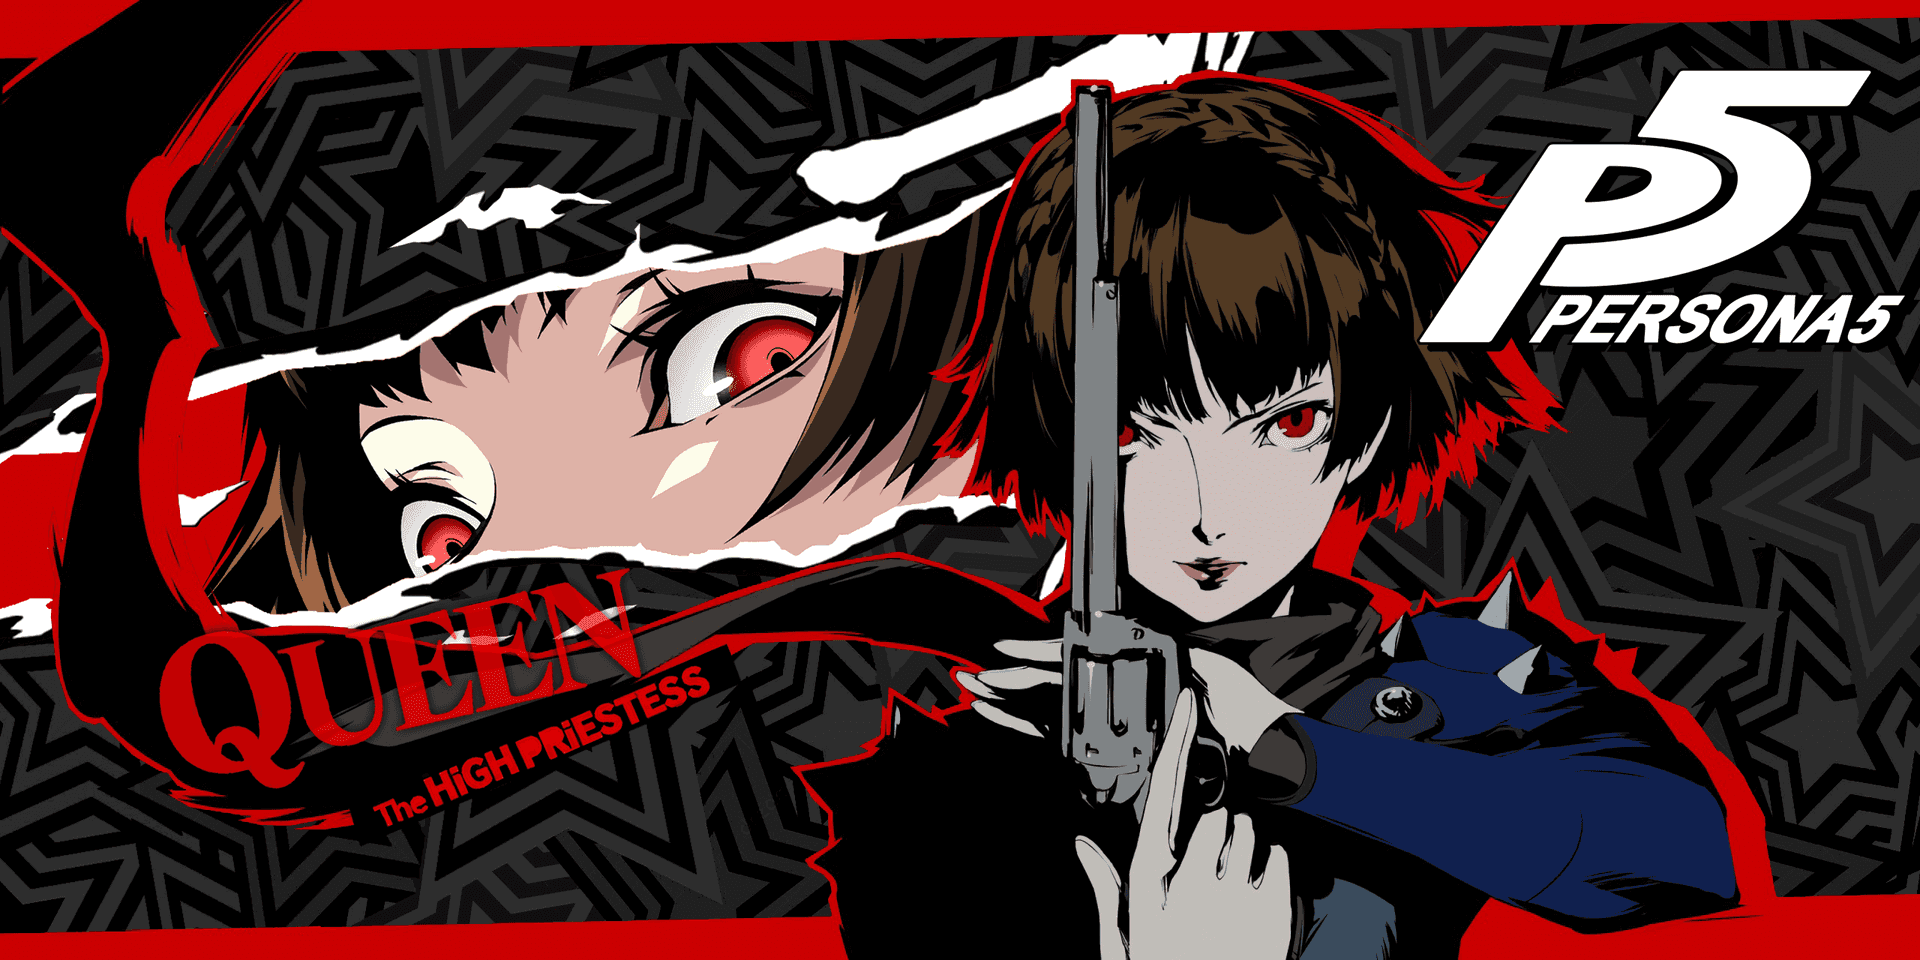 Persona 5 – Experience the captivating world of Persona 5